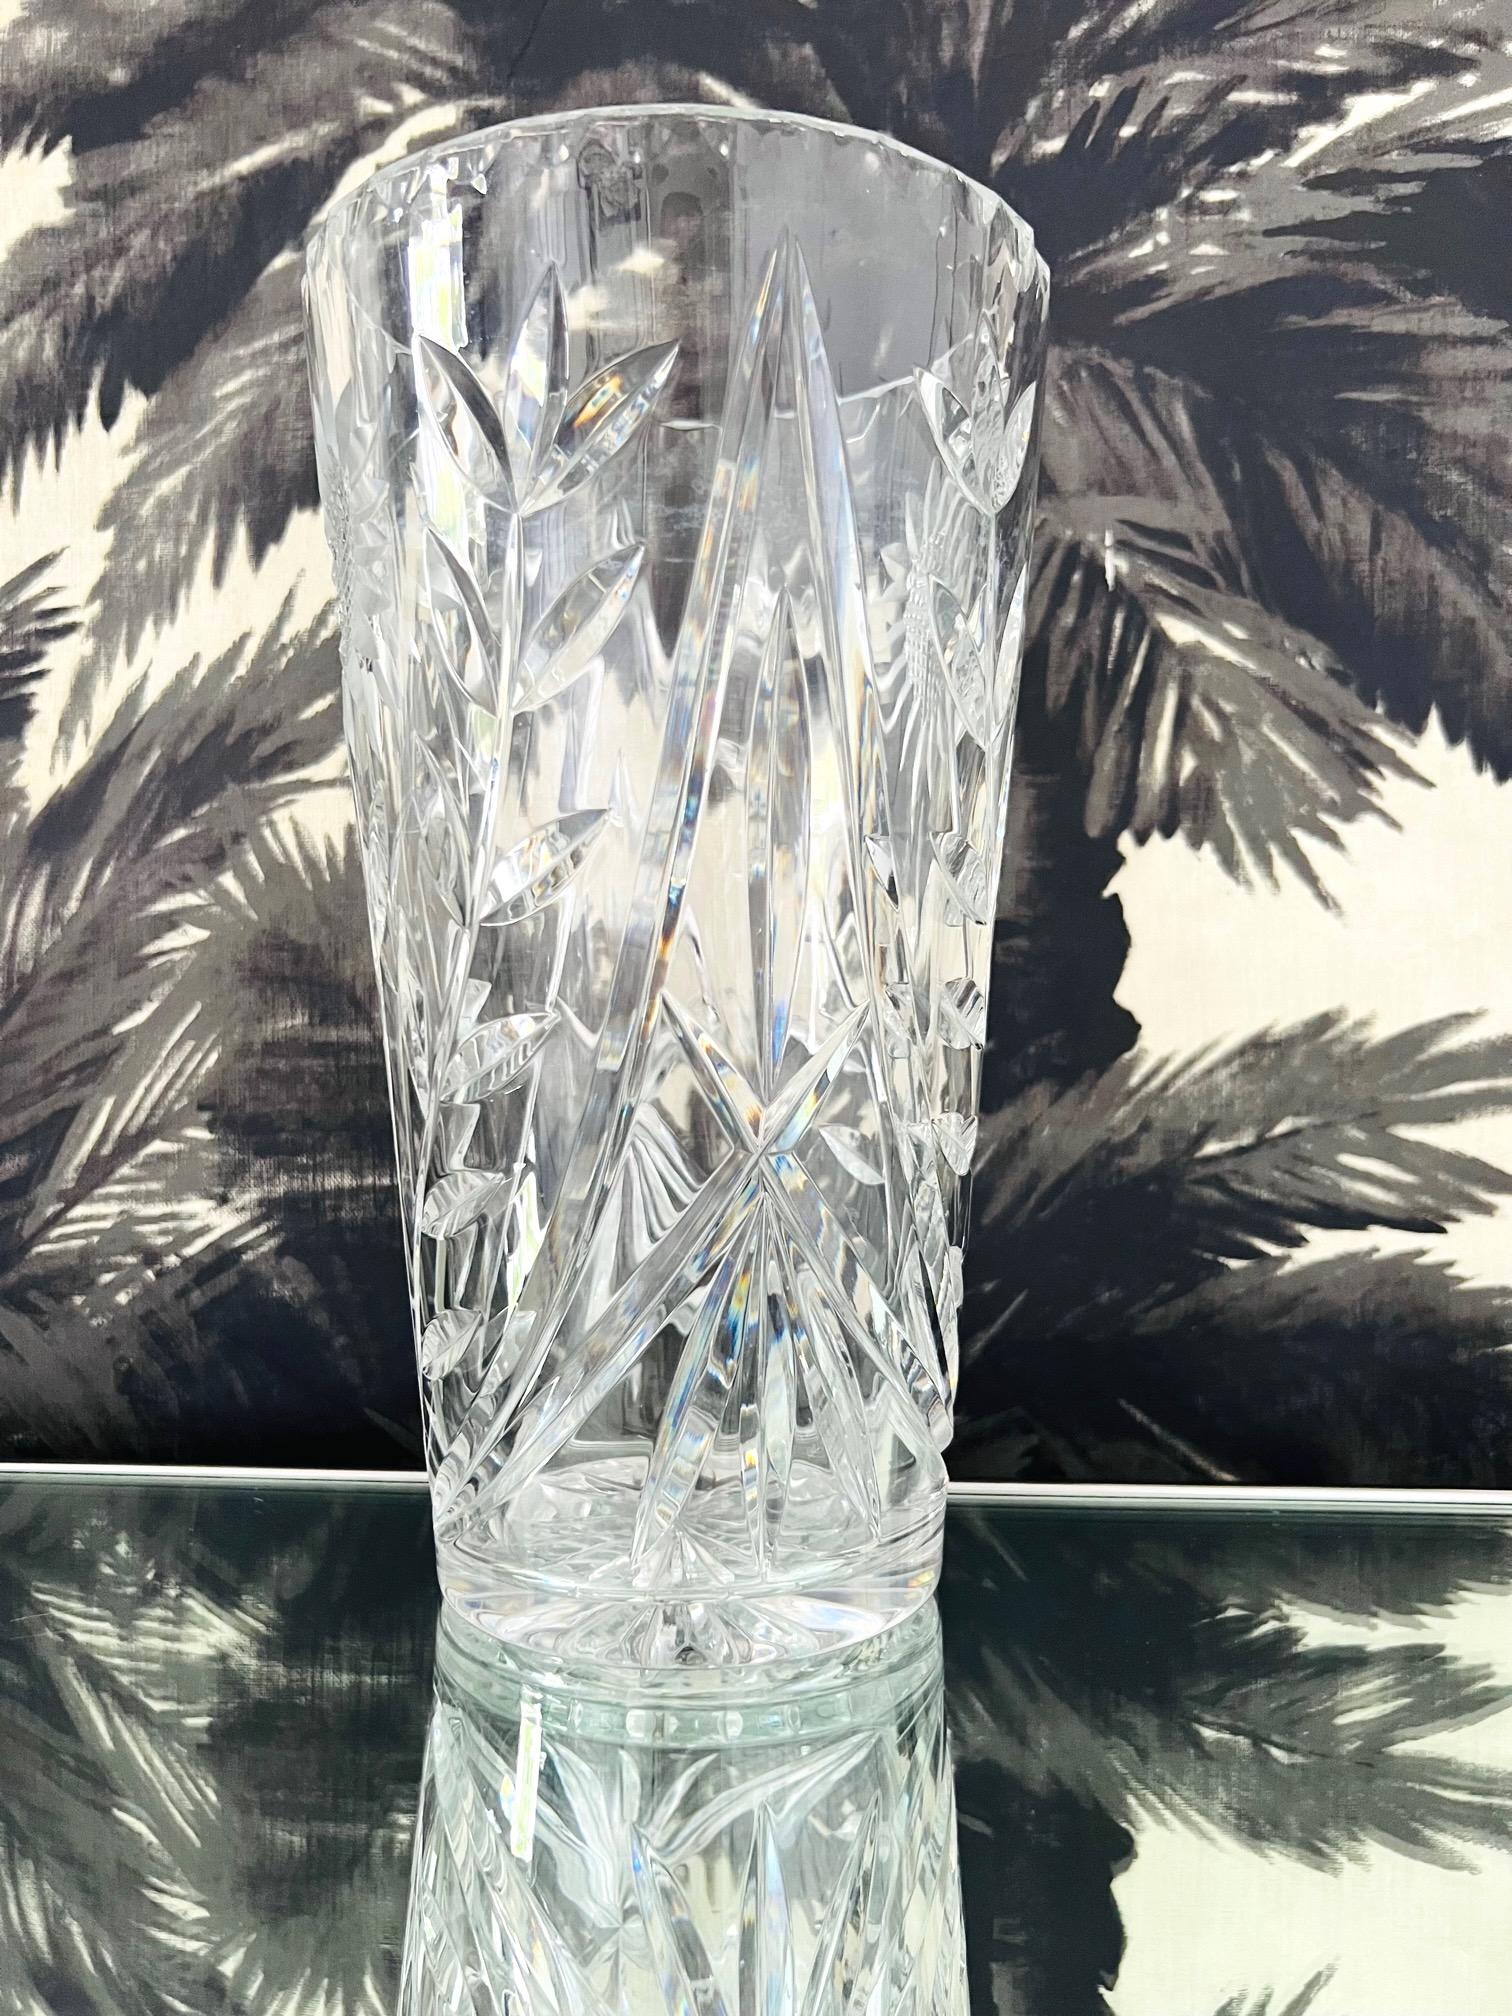 Waterford Crystal Etched Sunflower Vase with Cut Glass Designs, England, c. 2010 In Good Condition For Sale In Fort Lauderdale, FL